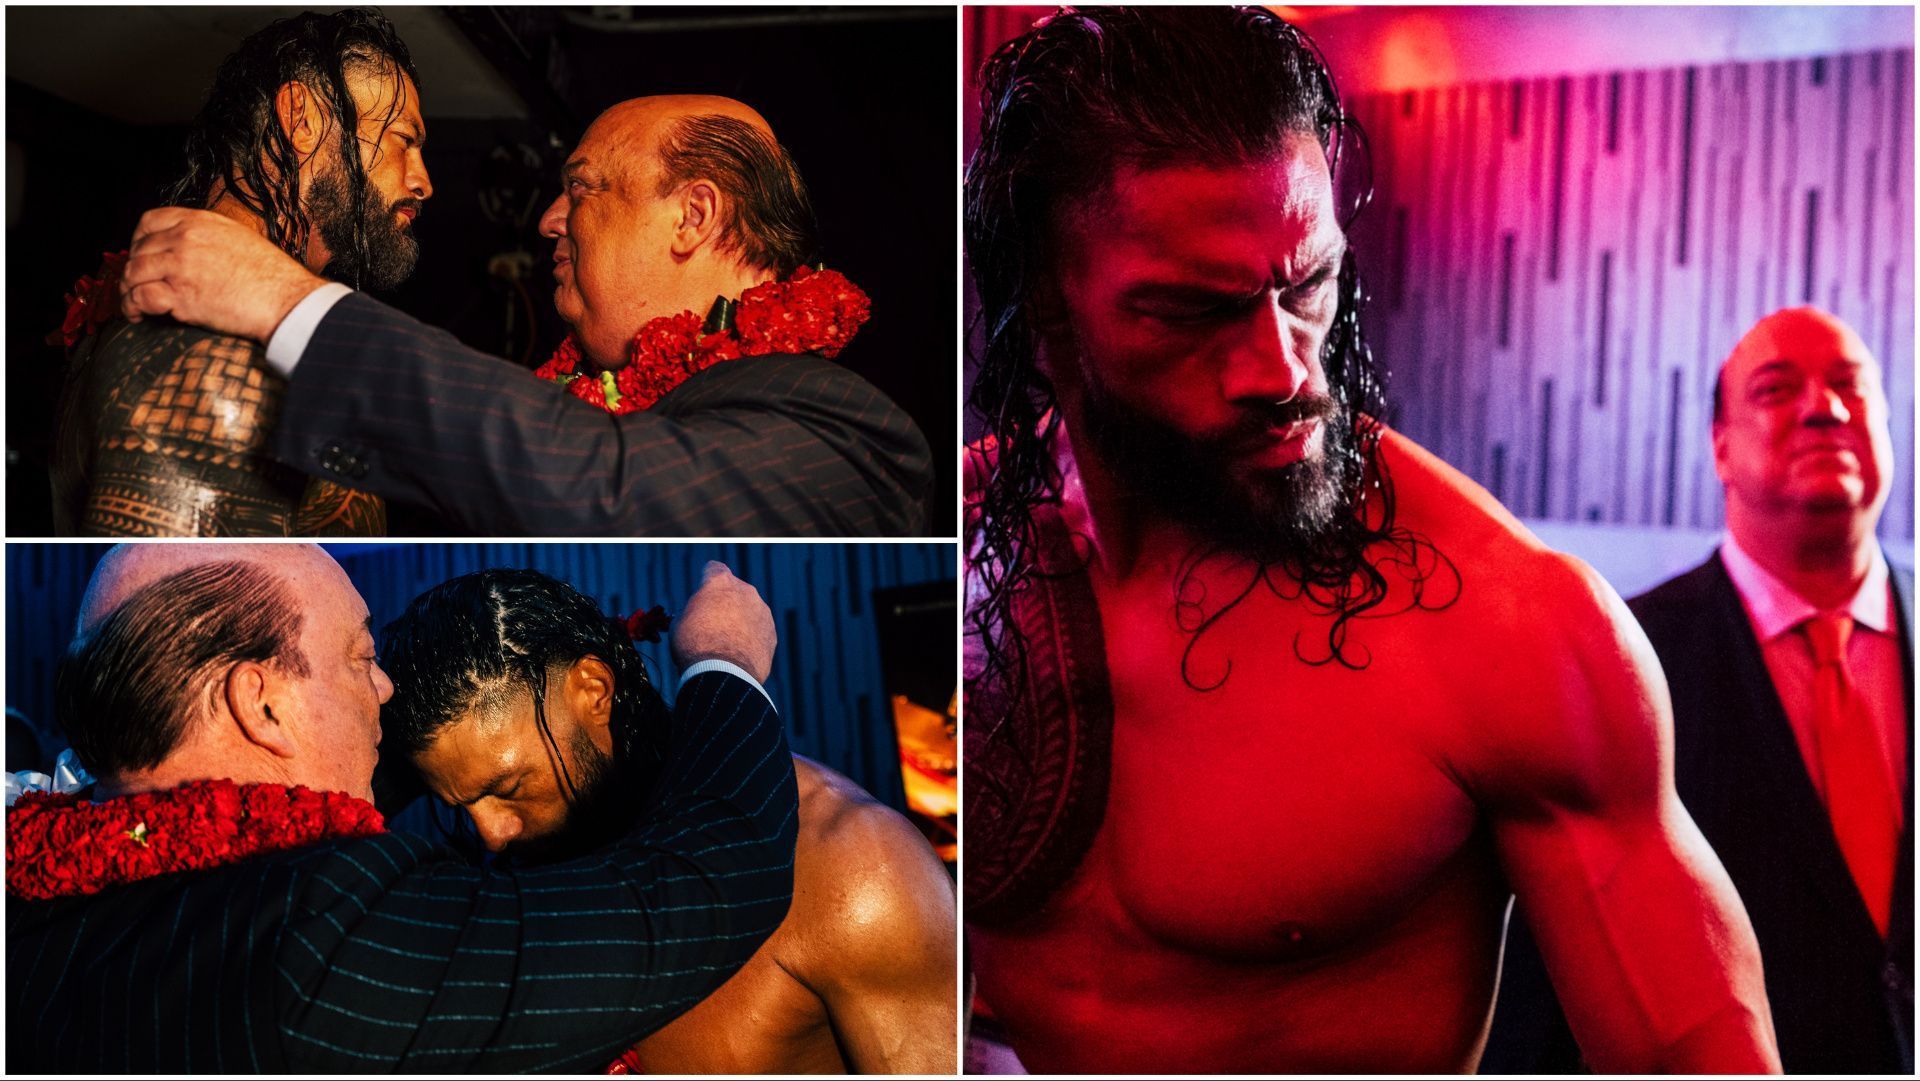 Paul Heyman and Roman Reigns share backstage moments at WWE events